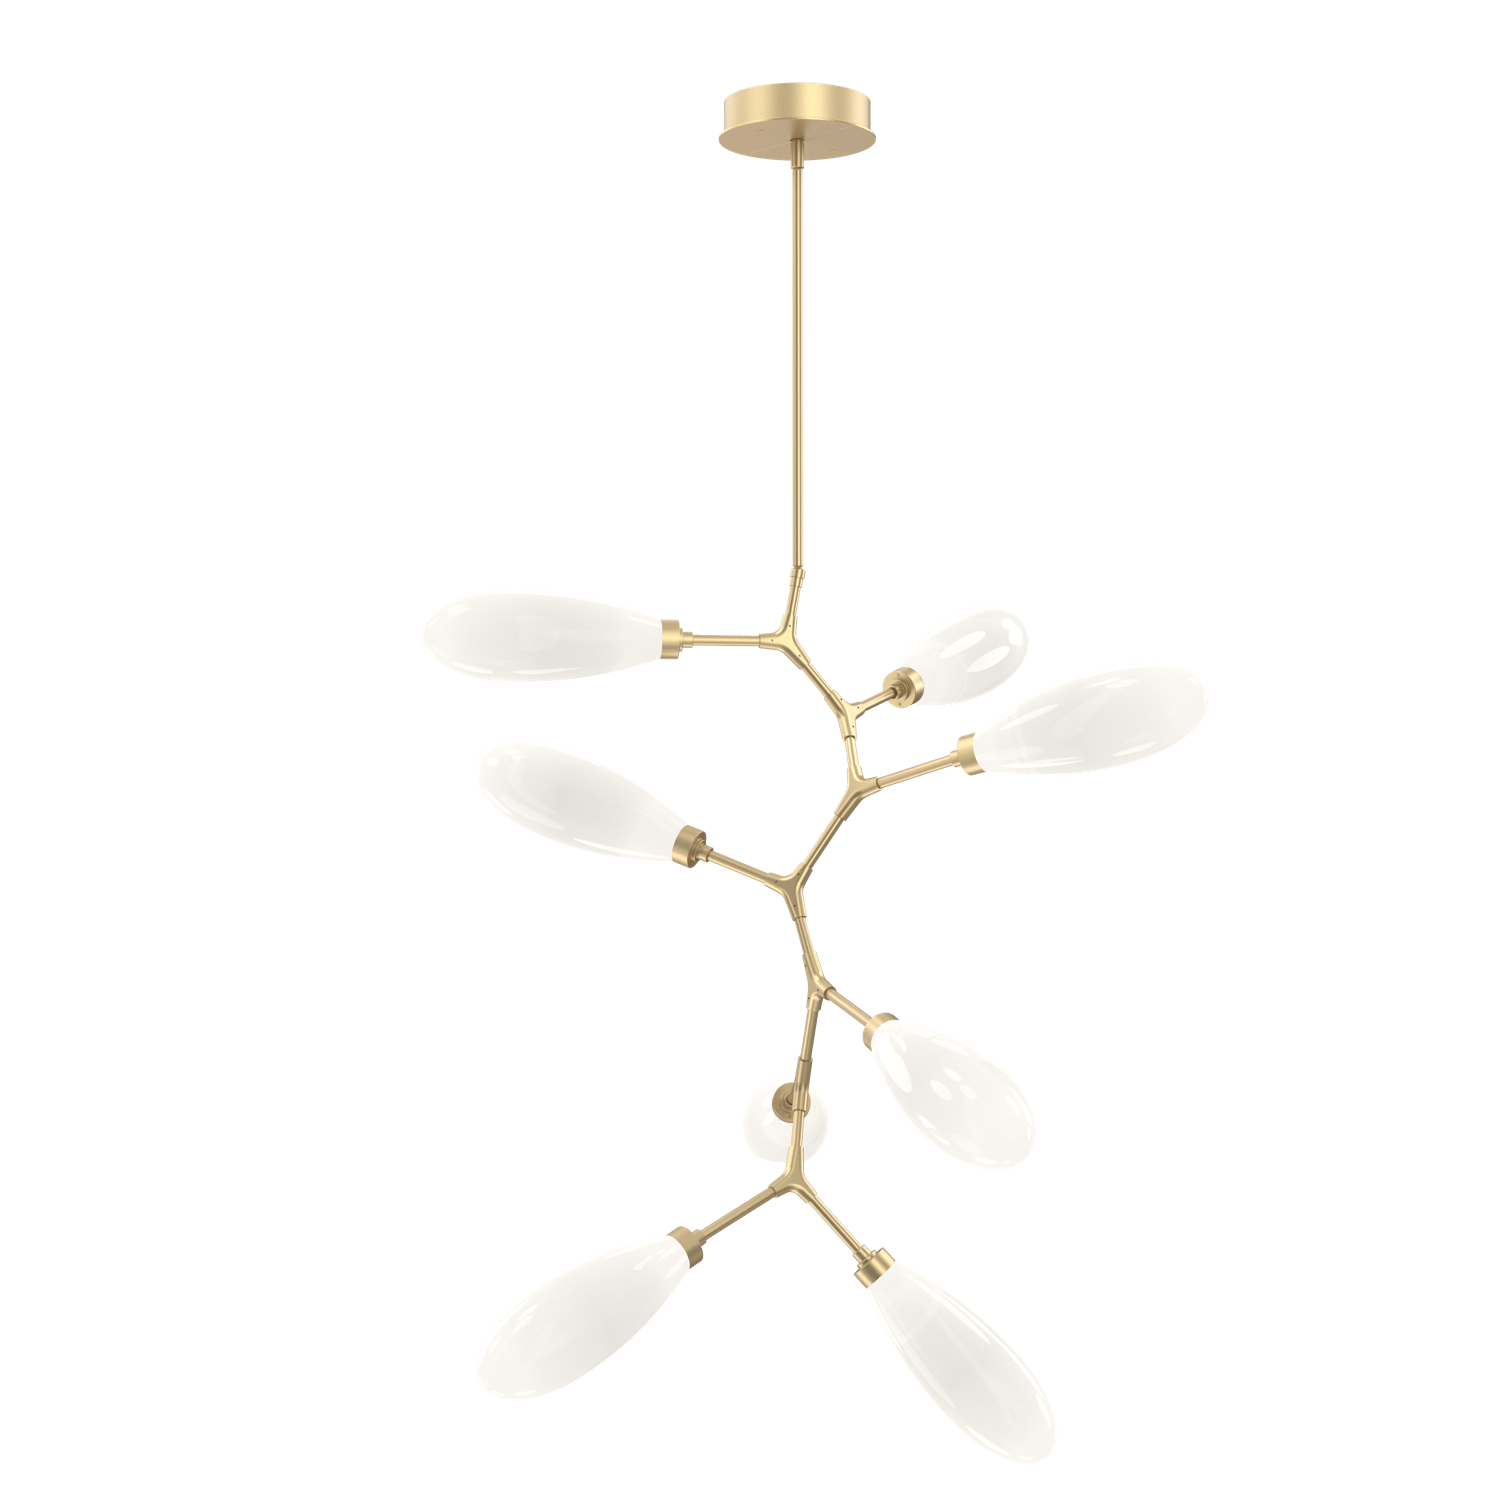 CHB0071-VB-GB-WL-LL-Hammerton-Studio-Fiori-8-light-organic-vine-chandelier-with-gilded-brass-finish-and-opal-white-glass-shades-and-LED-lamping